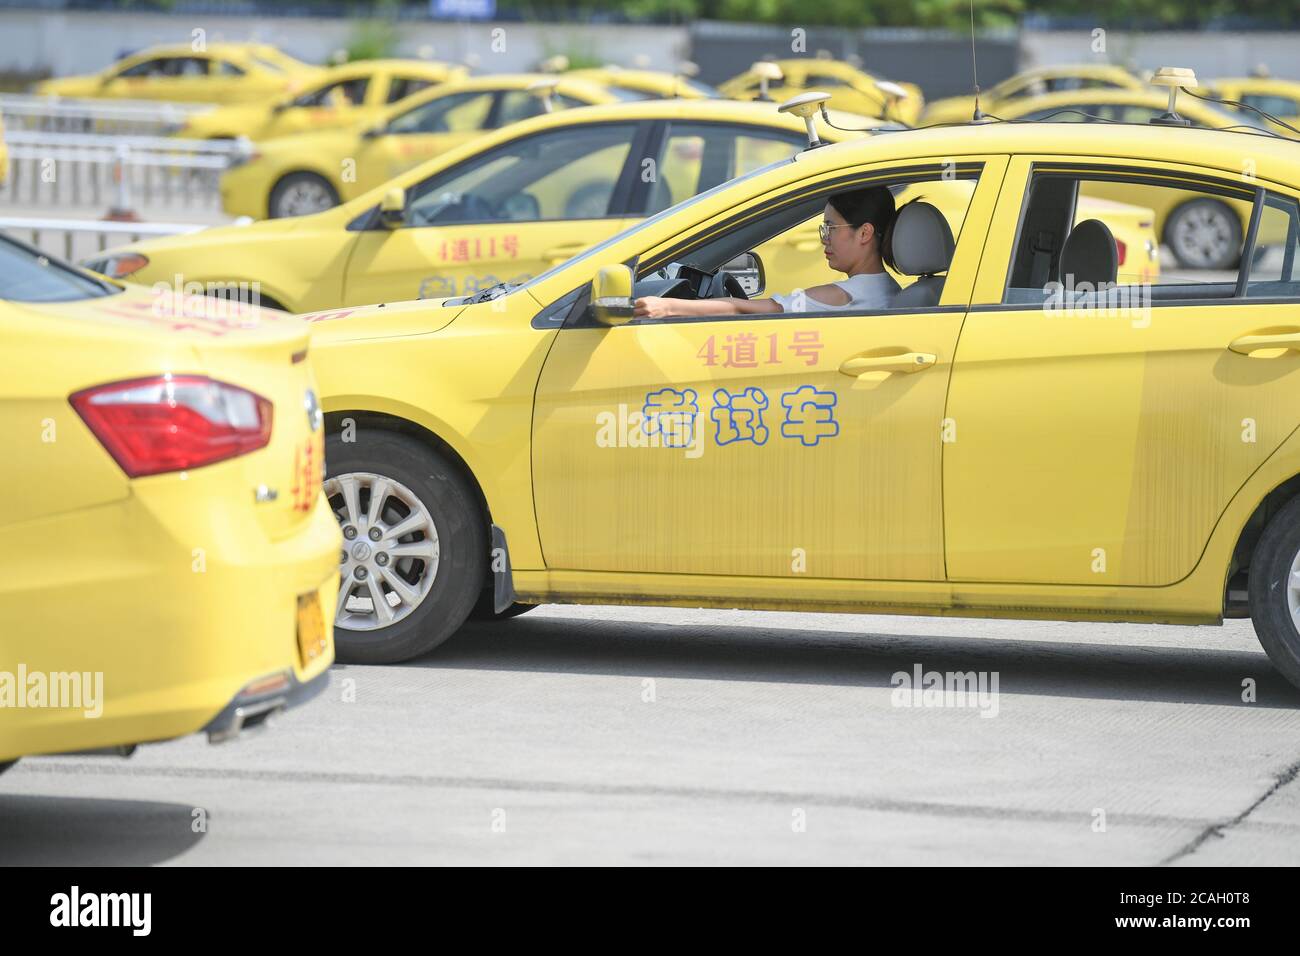 Fuzhou, China. 07th Aug, 2020. A driving test candidate waits in a car at a driving test venue in Fuzhou, capital of southeast China's Fujian Province, Aug. 7, 2020. According to the data provided by Fuzhou traffic police, since the resumption of the full subject test for small vehicle drivers on April 15, the daily booking volume of major driving test venues in Fuzhou has continued to rise. Especially during the summer vacation, the number of student-based driving test candidates continues to increase. Credit: Xinhua/Alamy Live News Stock Photo